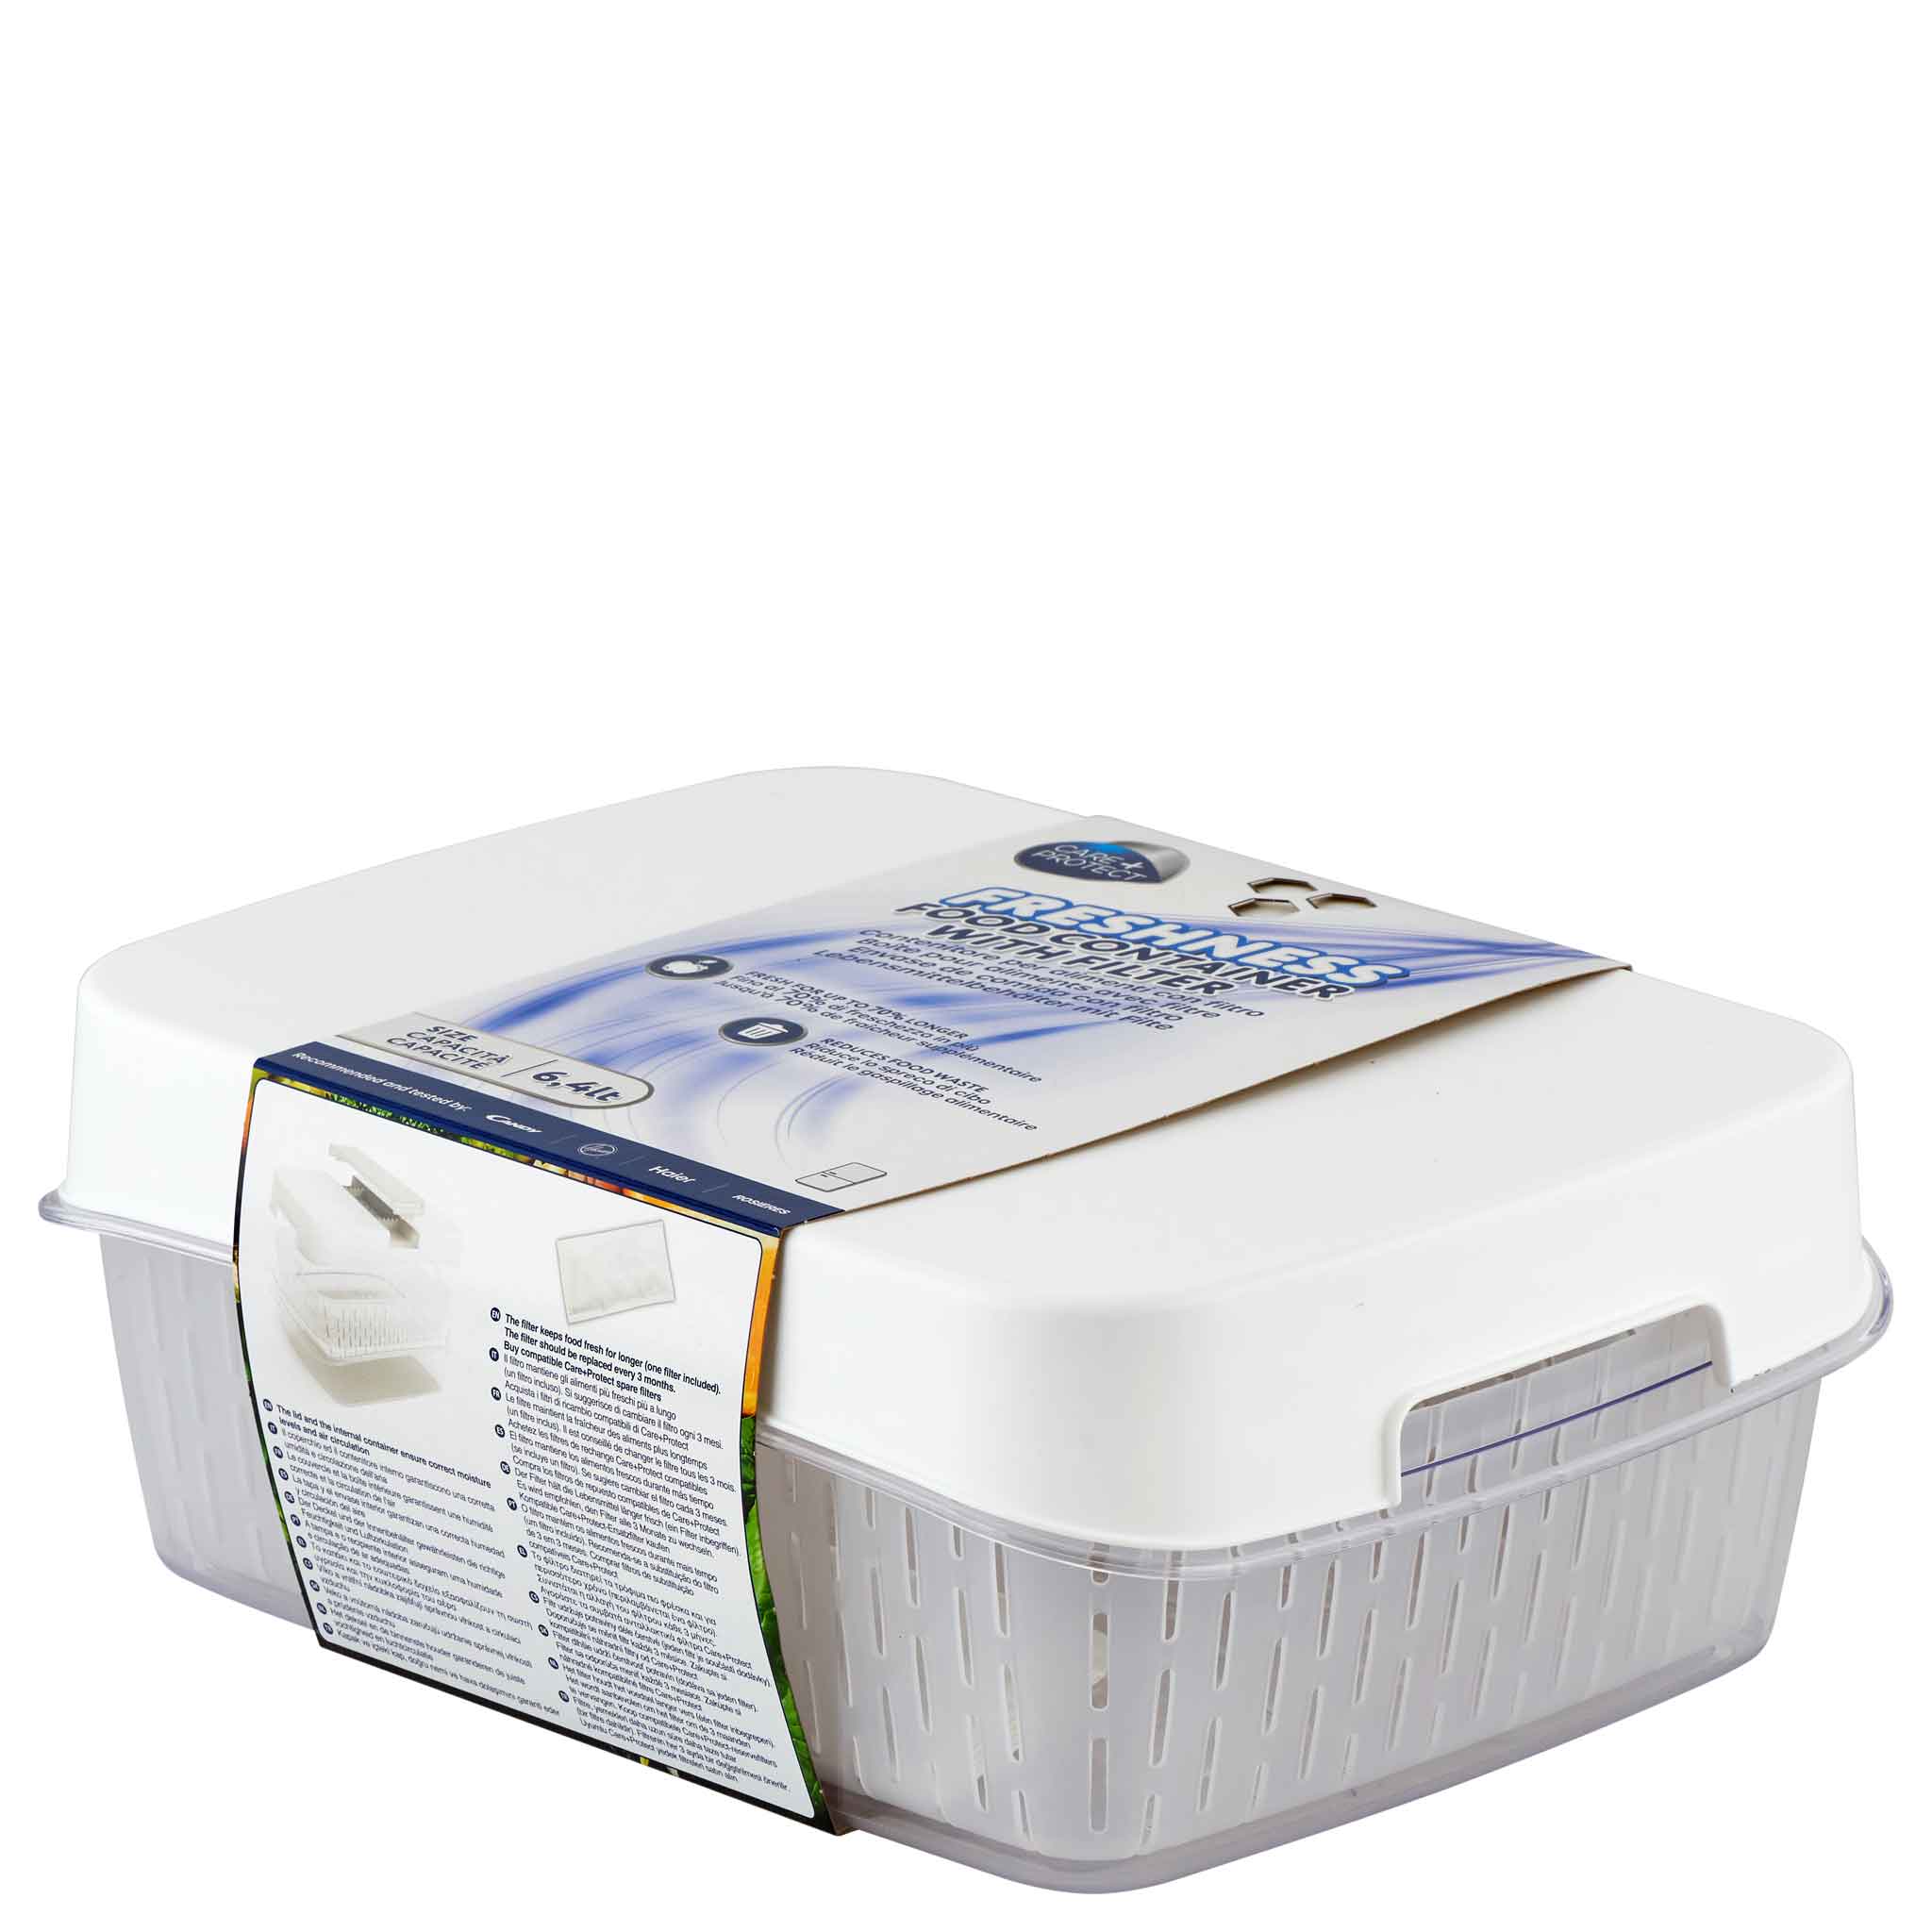 Freshness Food Container with Filter, 6.4l